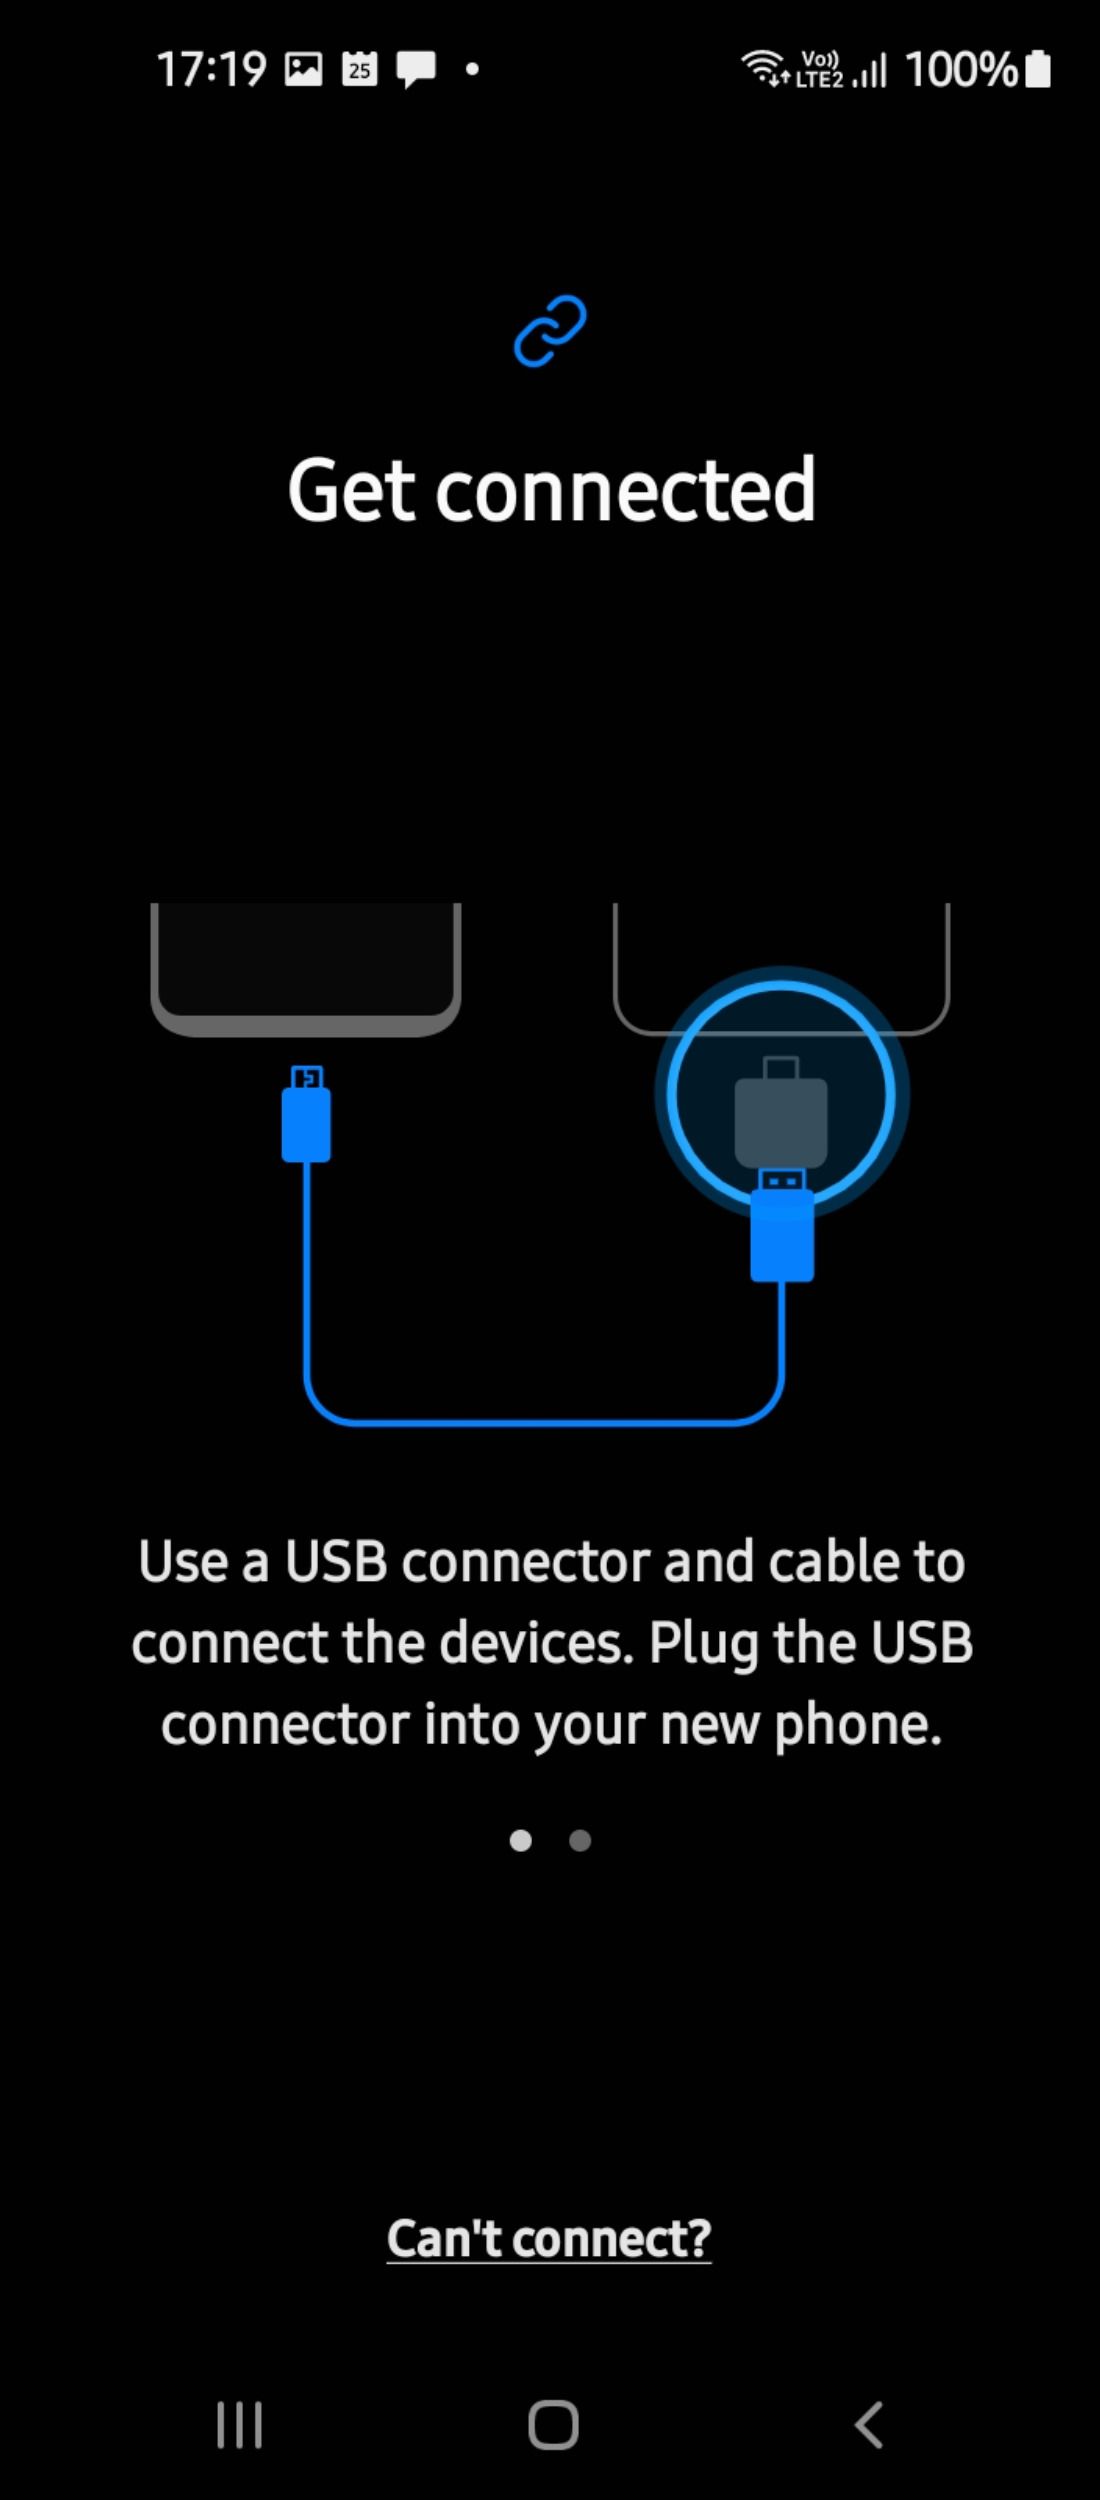 USB connector instructions in Smart Switch